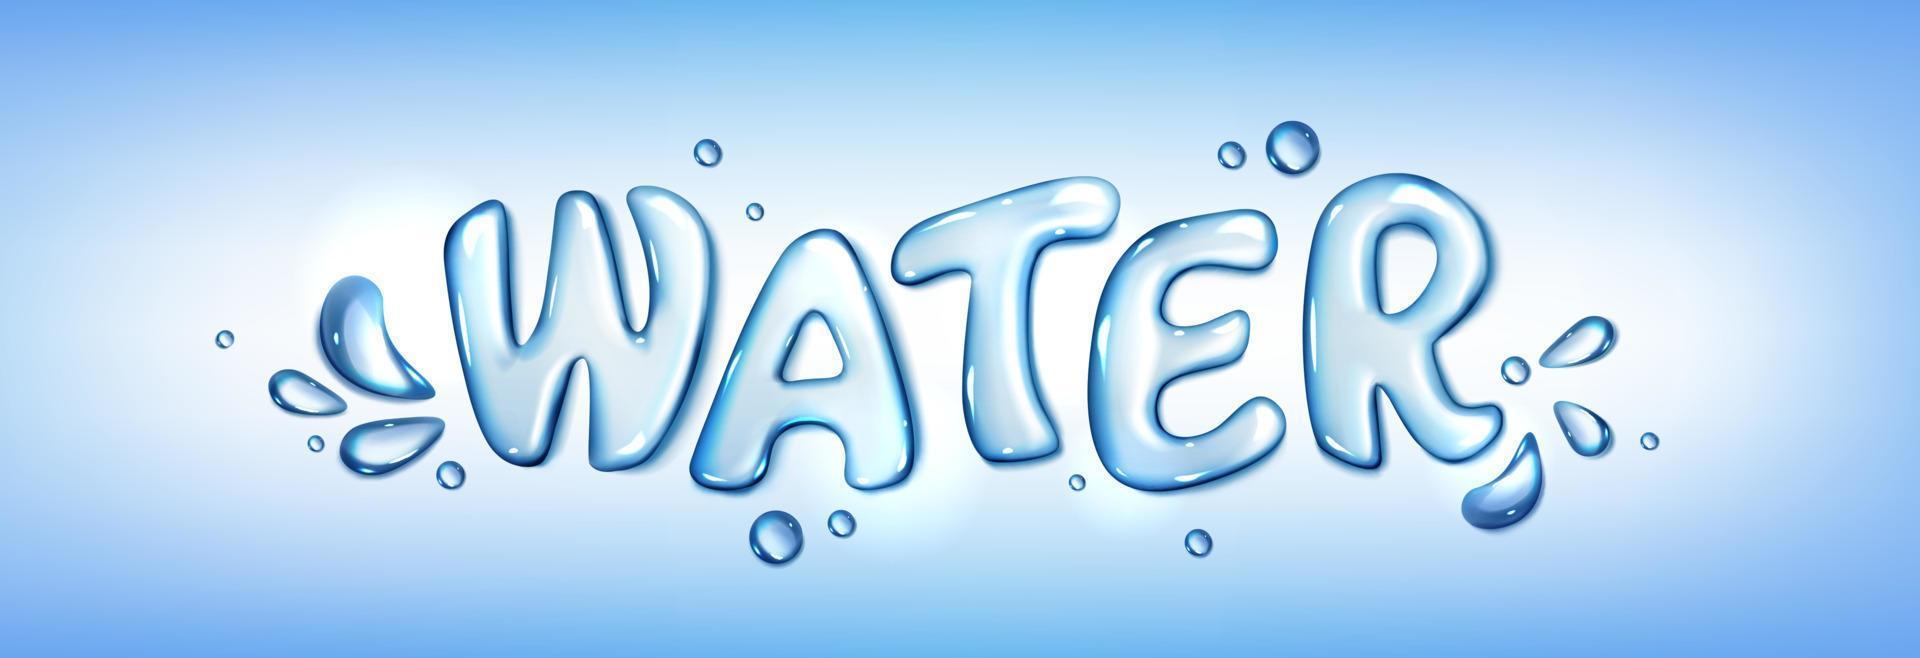 Realistic water text with splash. 3d bubble font vector